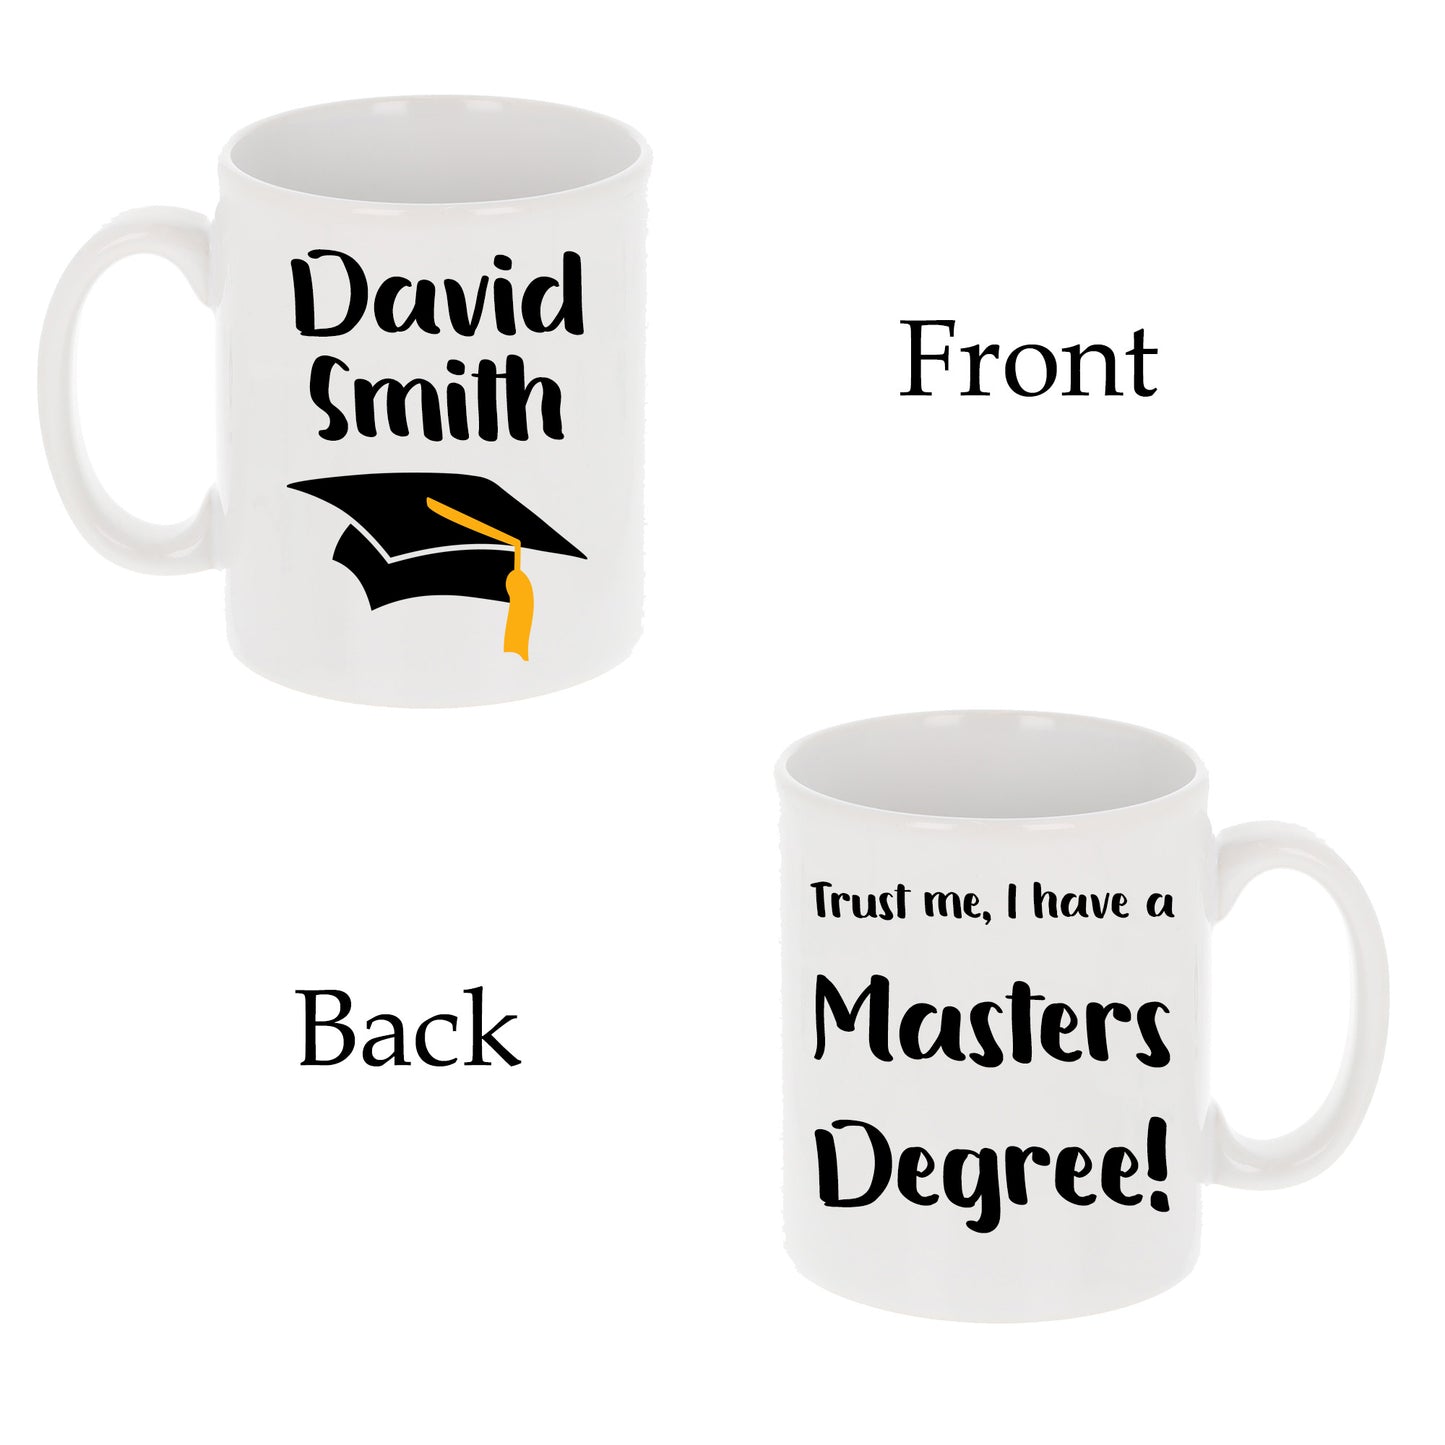 Personalised 'Trust me, I have a masters degree' Mug and Coaster Graduation Present  - Always Looking Good -   